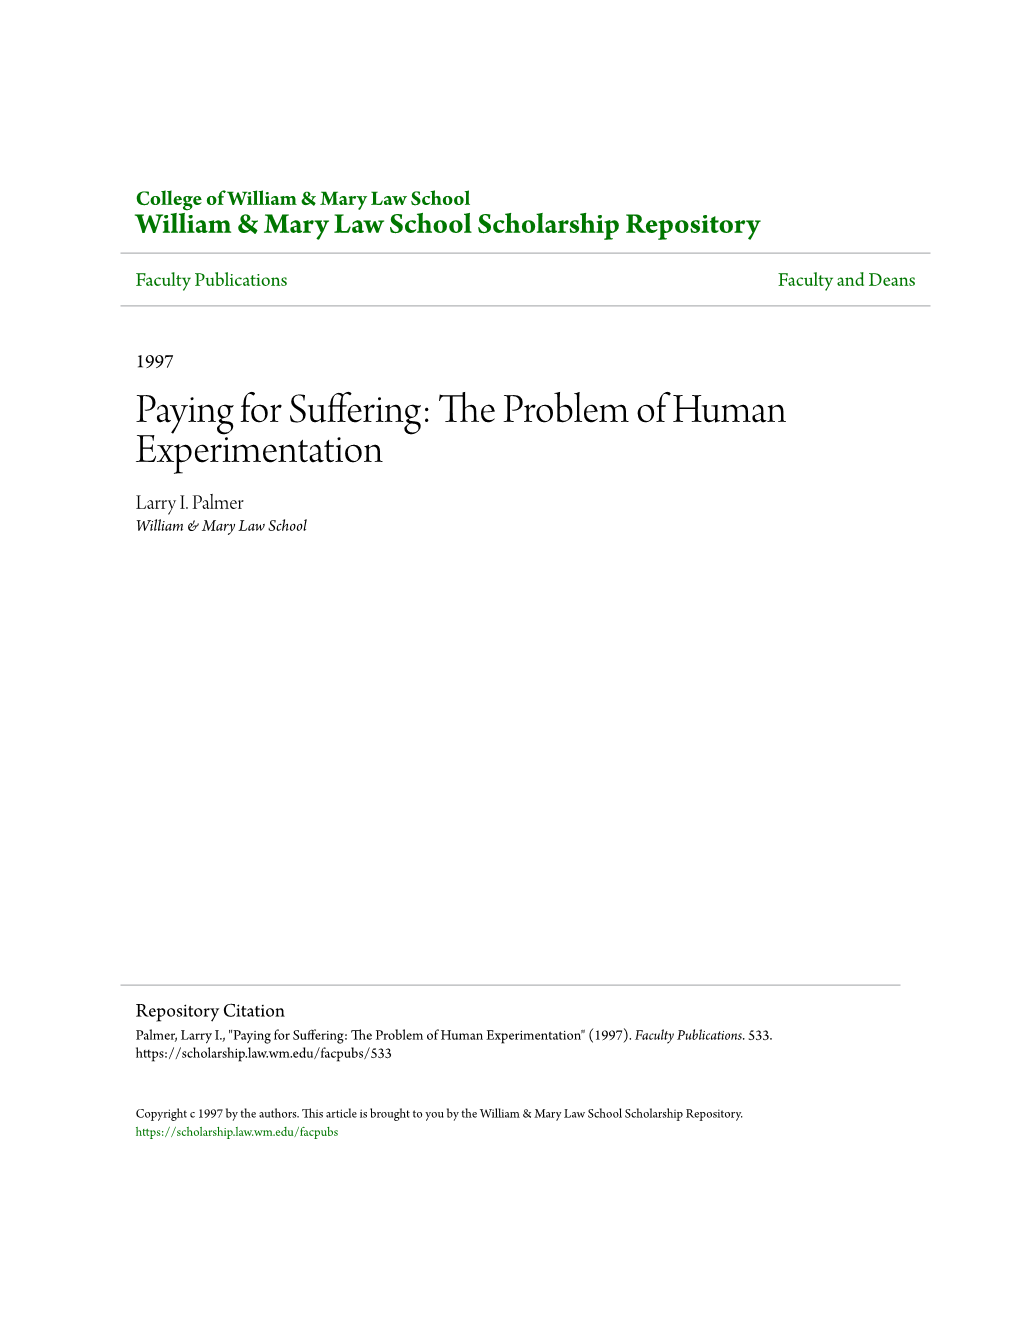 Paying for Suffering: the Problem of Human Experimentation